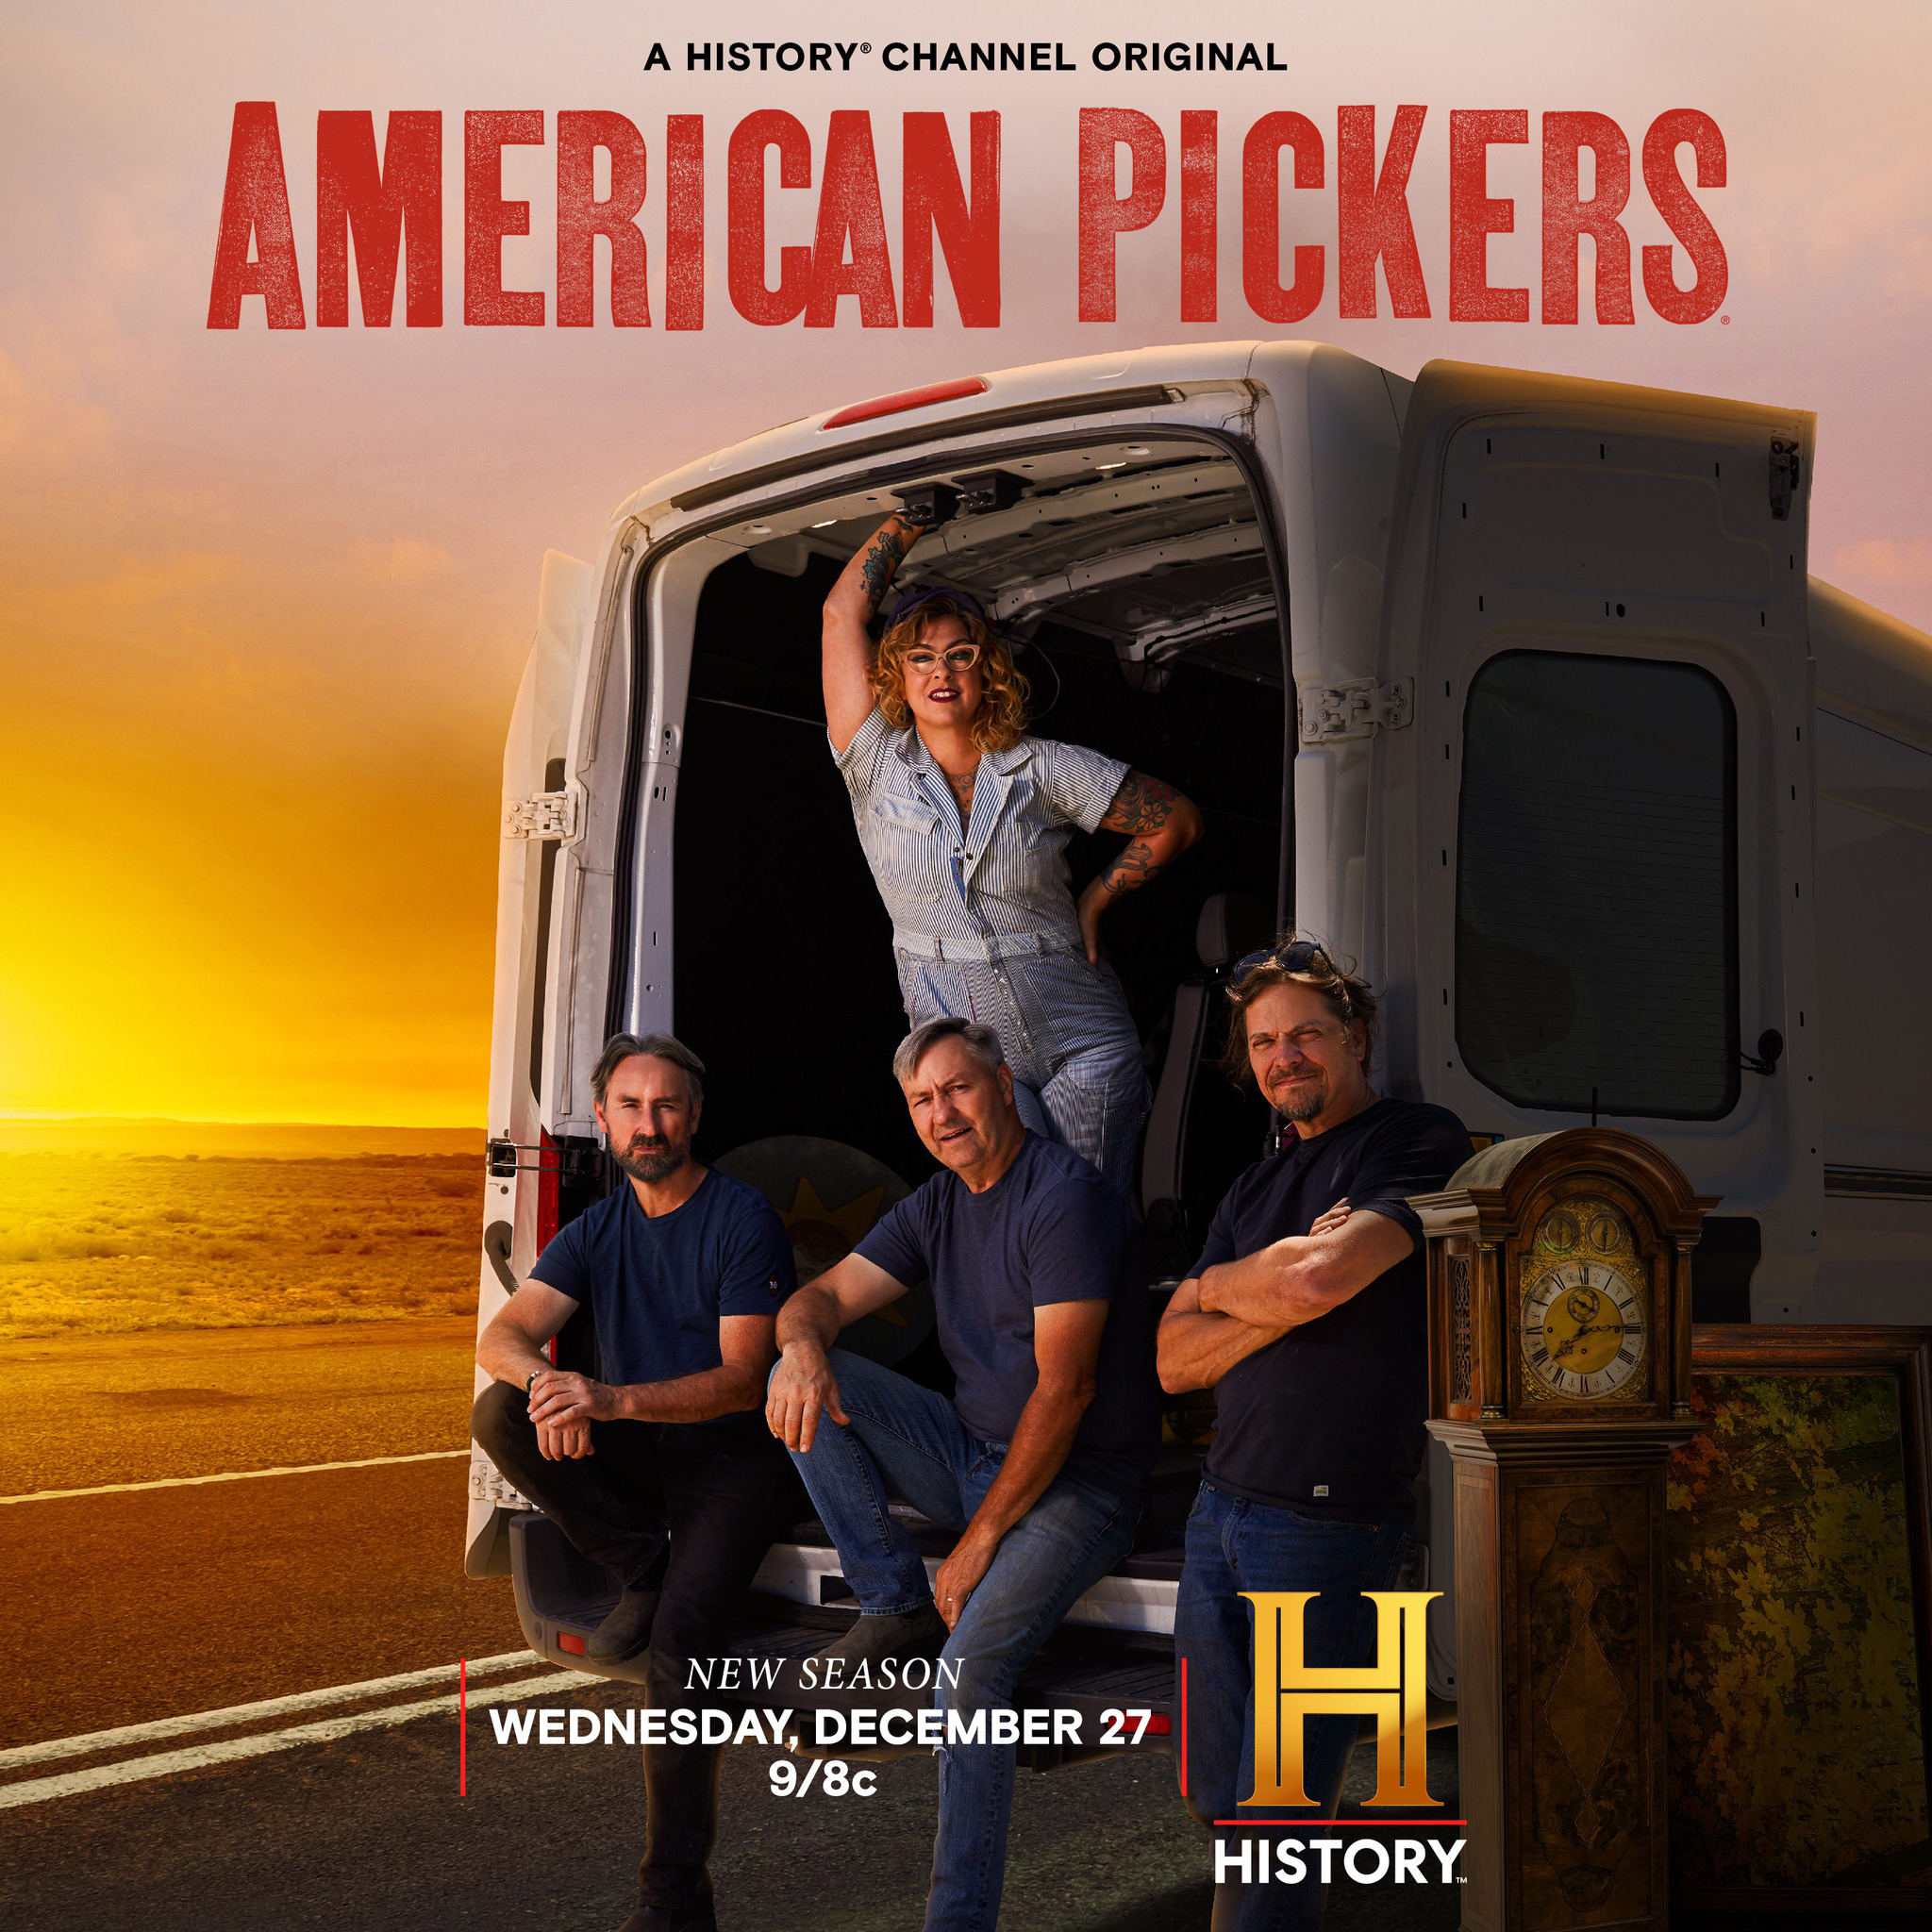 American Pickers has suffered majorly low ratings lately, leaving fans uncertain it would come back